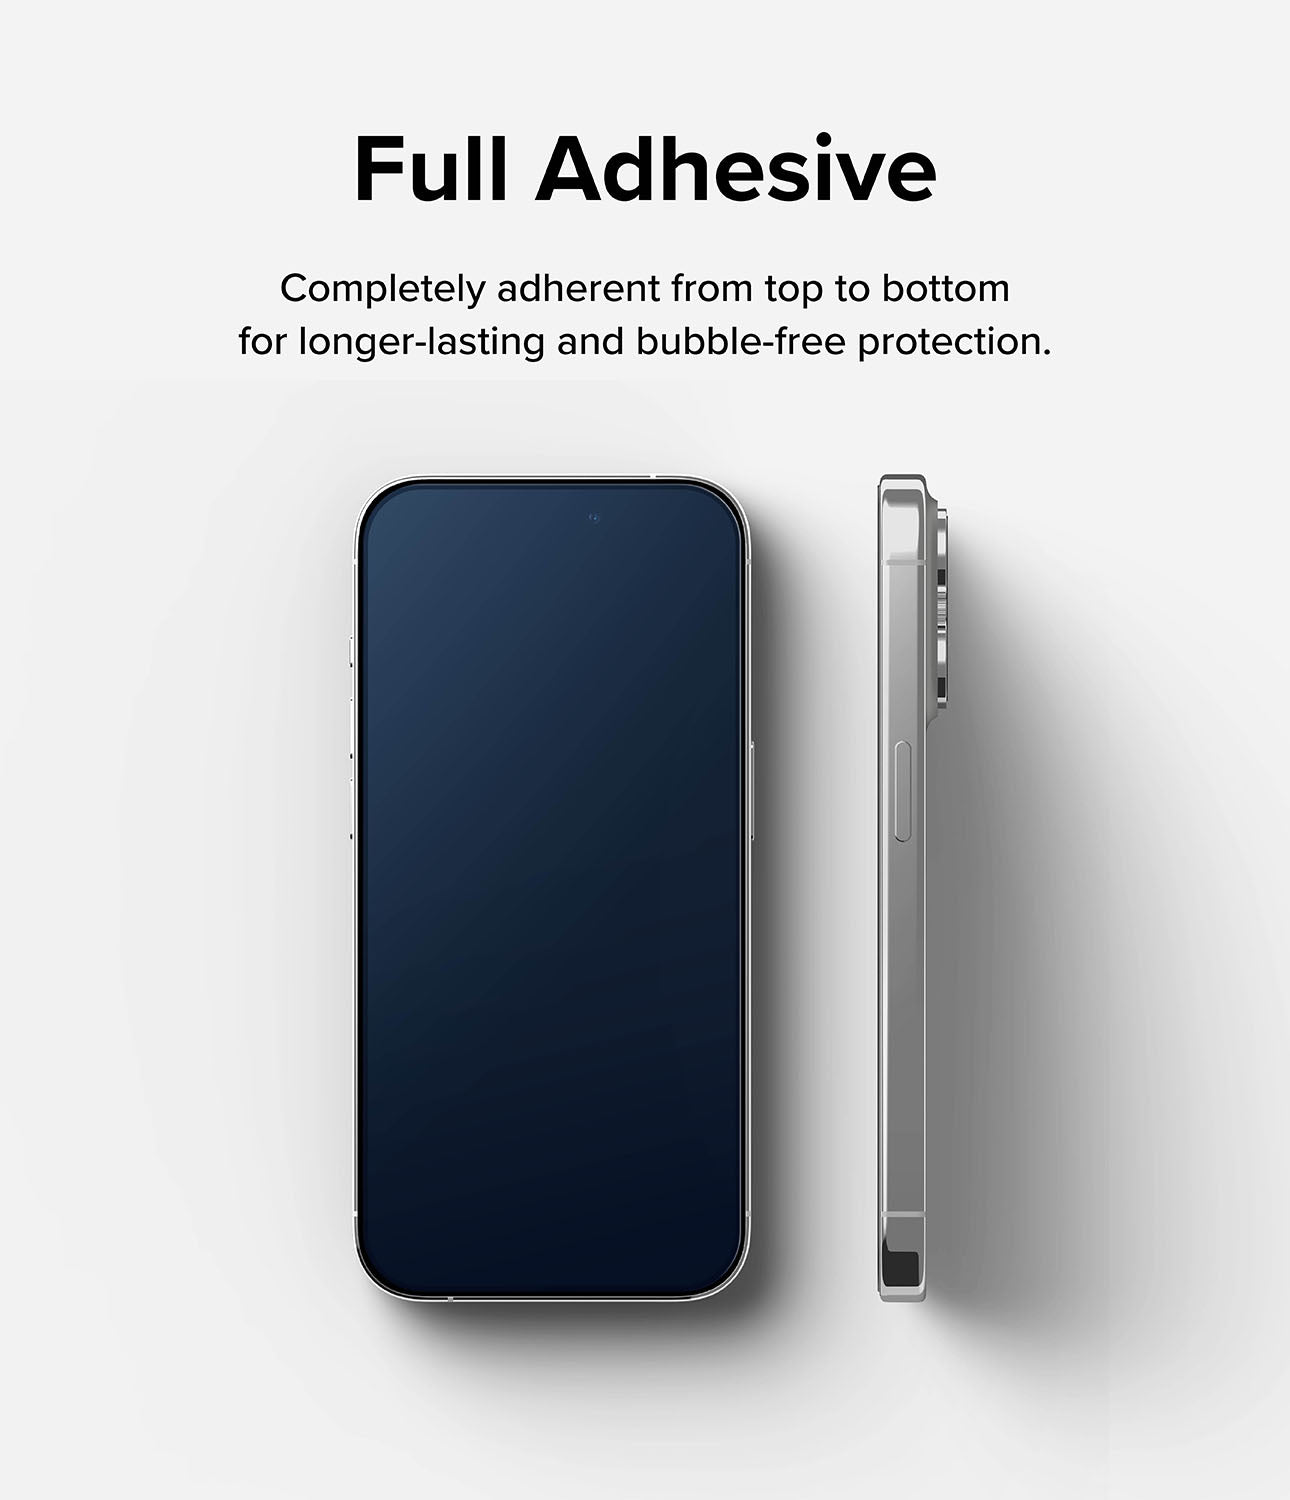 iPhone 15 Pro Screen Protector | Full Cover Glass - Full Adhesive. Completely adherent from top to bottom for longer-lasting and bubble-free protection.